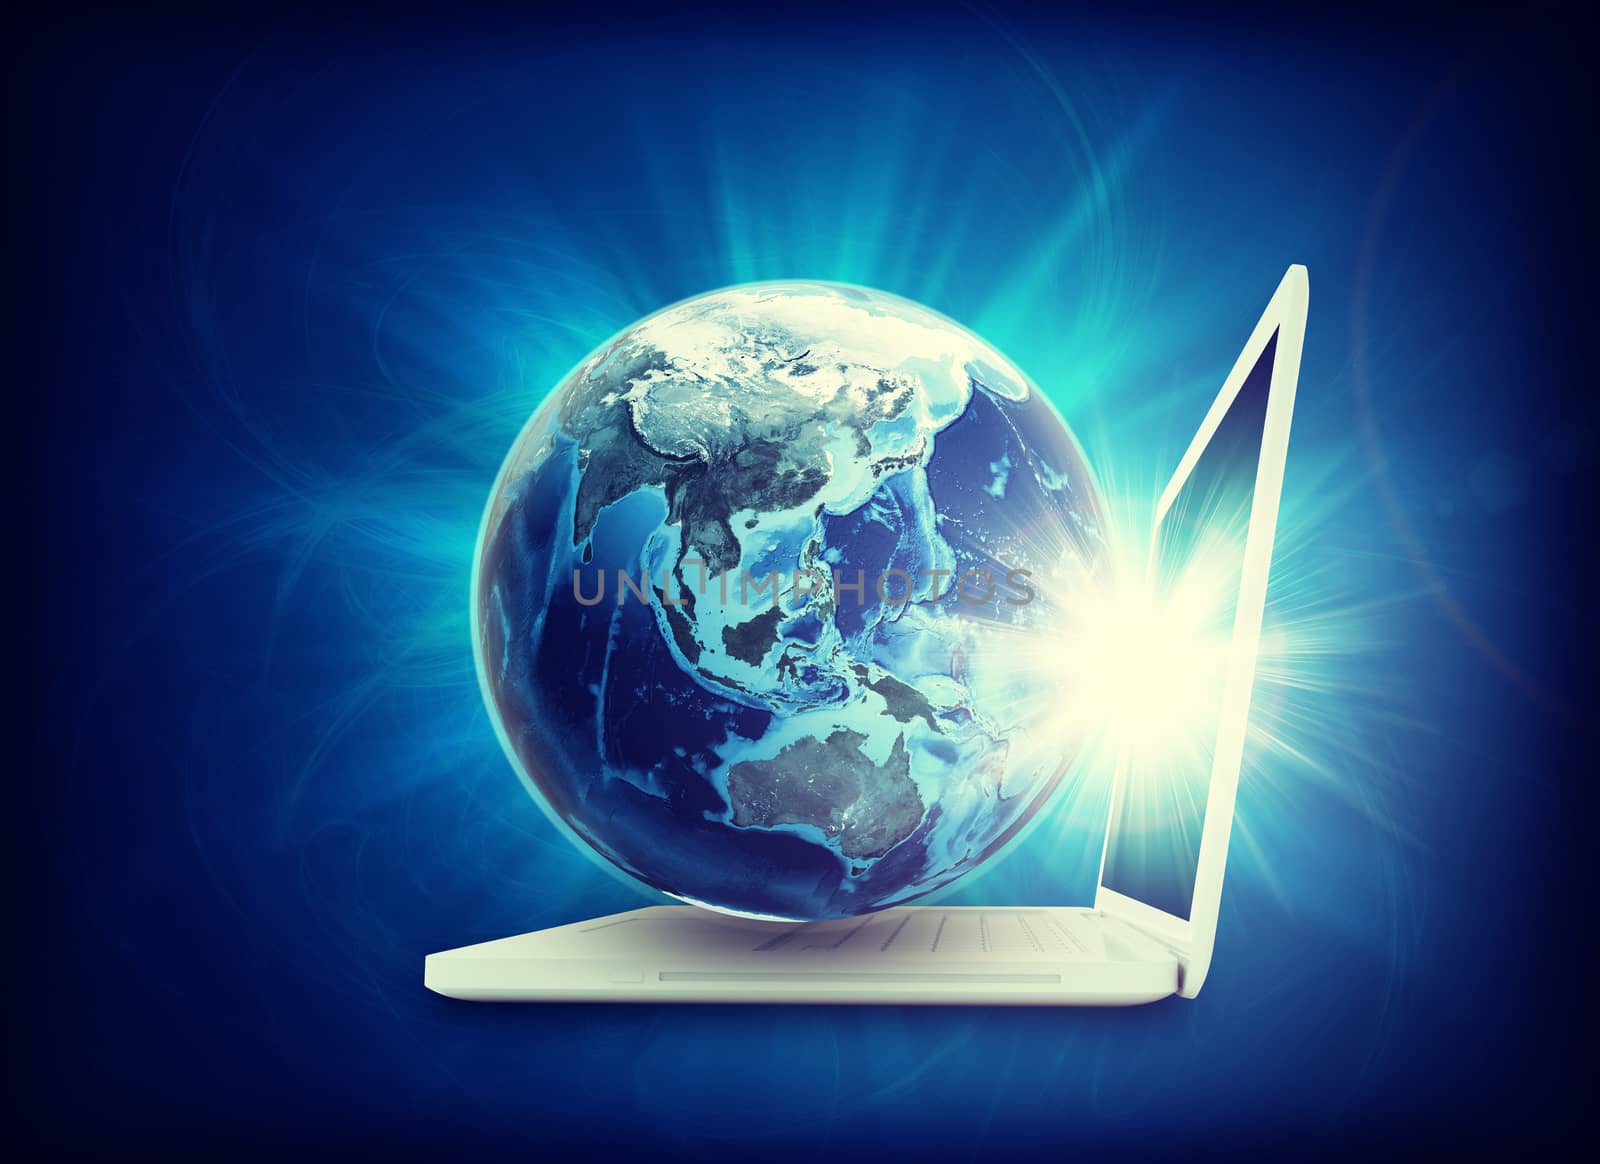 Earth model on laptop on abstract blue background, side view. Elements of this image furnished by NASA